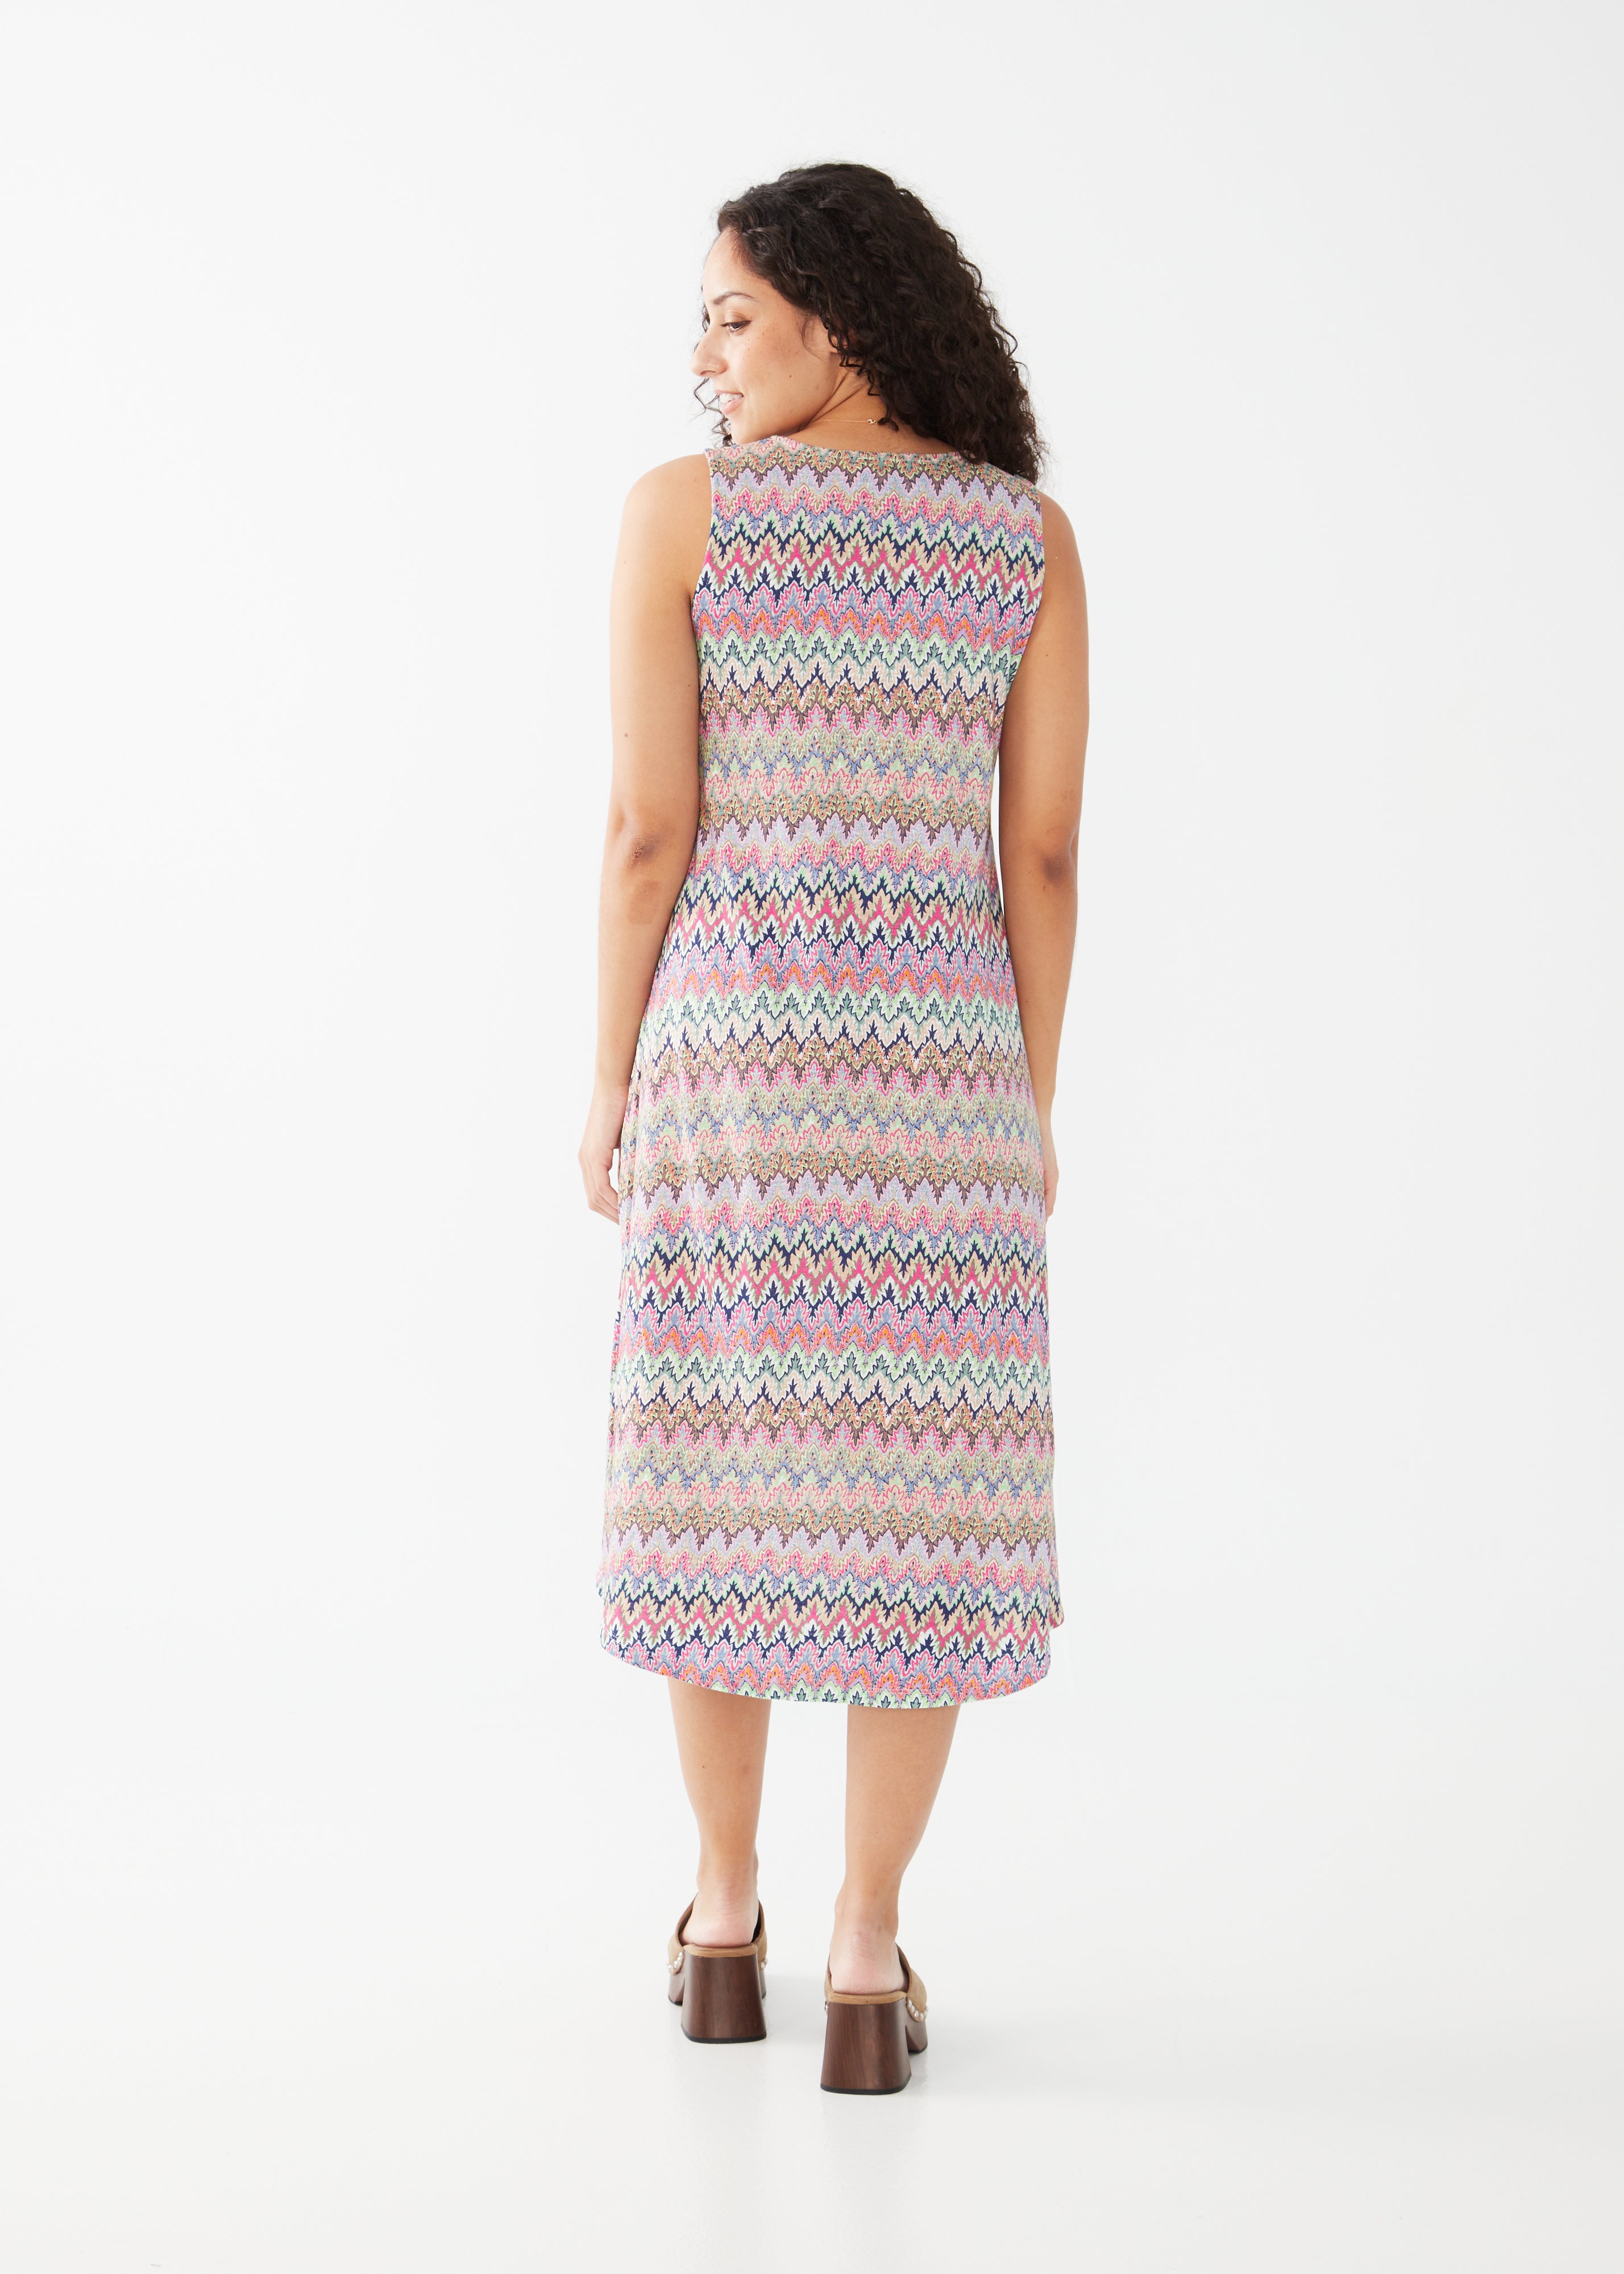 Get ready to turn heads in our FDJ Lace Up Detail Dress! Featuring a faux crochet stripe design and a playful mix of multi-colour, this dress is the perfect combination of style and comfort. Rock this dress and make a statement wherever you go! (Warning: may cause outfit envy)